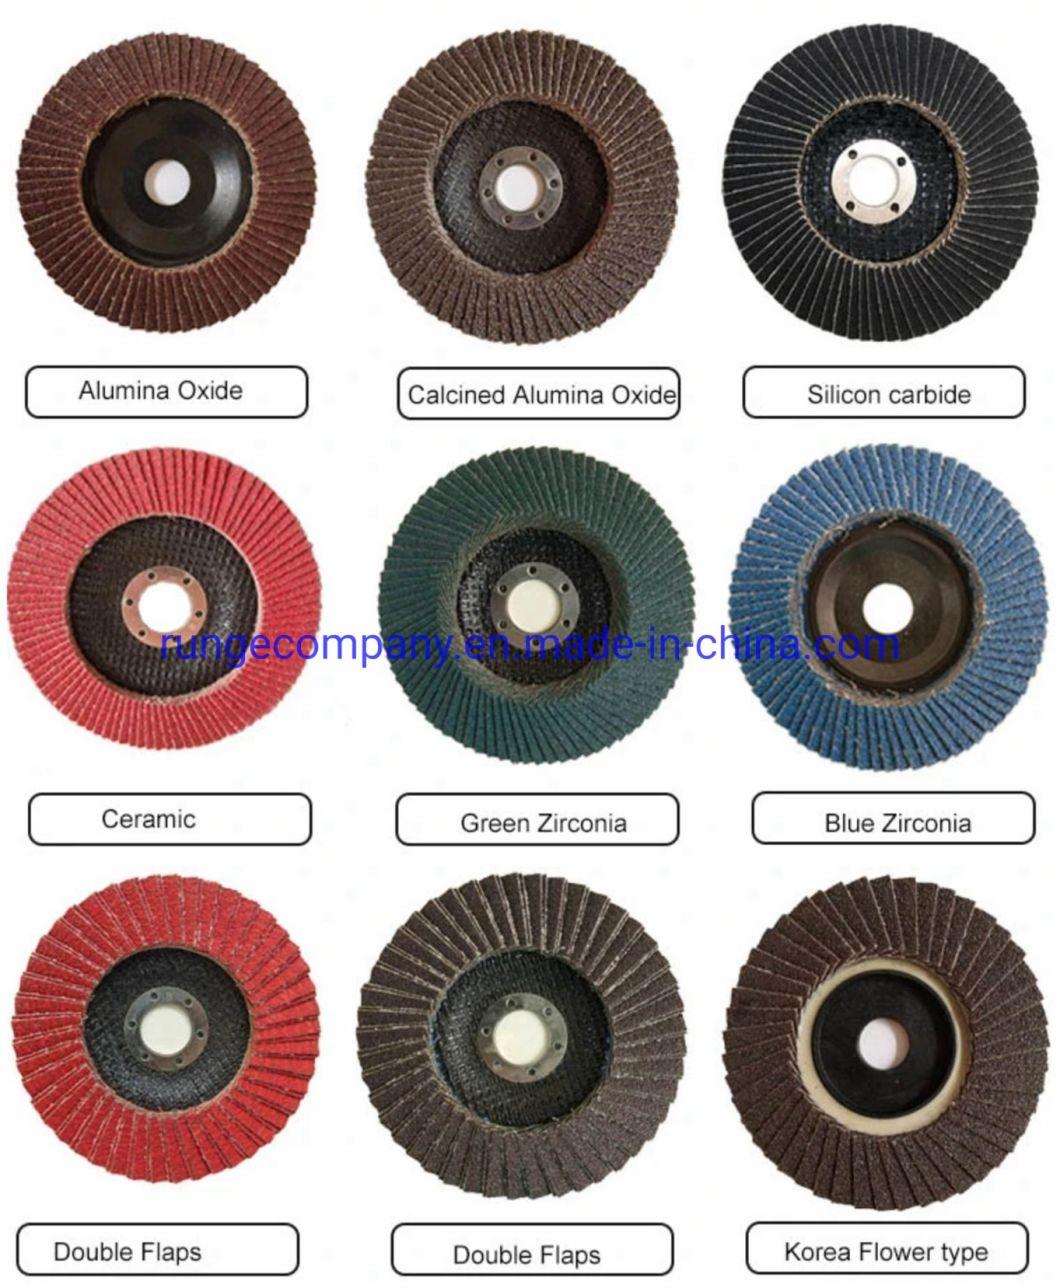 Power Tool Abrasive Grinding Wheel Type 27 Premium All Materials Grinding Wheel for Angle Grinders 7"